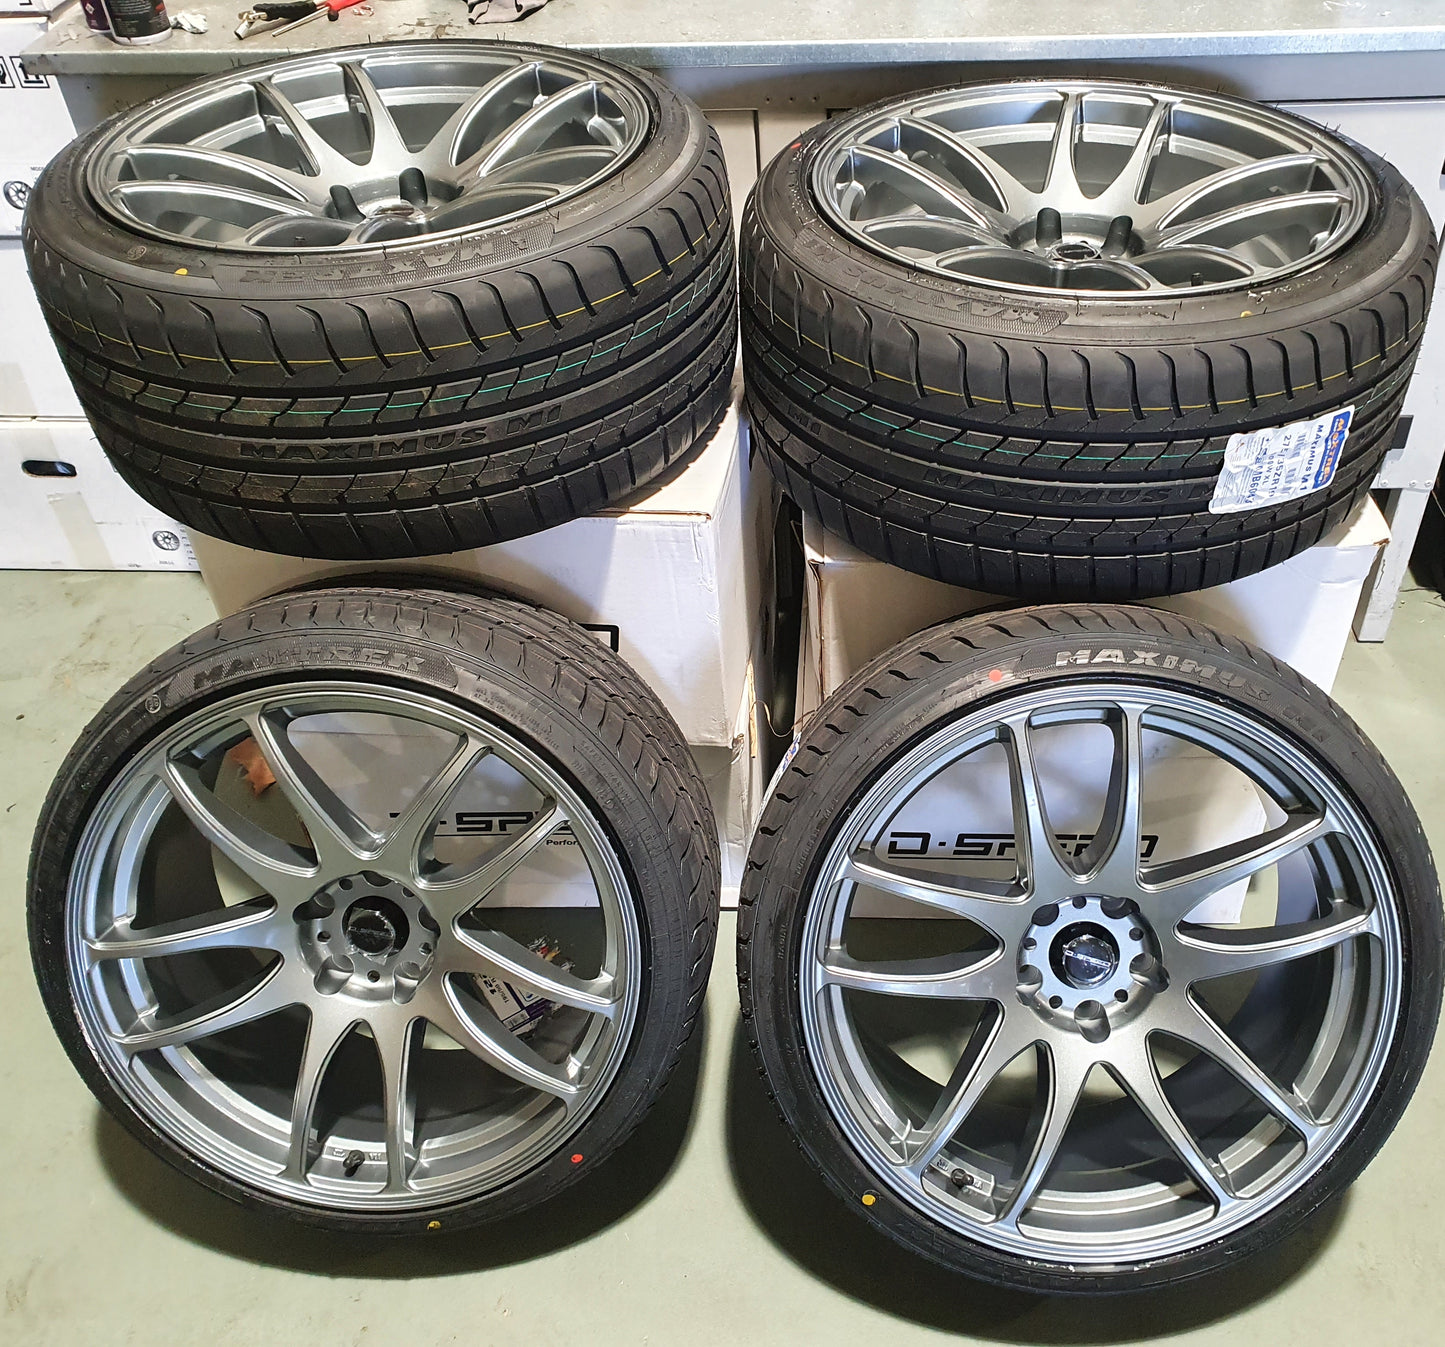 D-Speed DS-02 19x9.5 5x114.3 Wheel & Tyre Packages